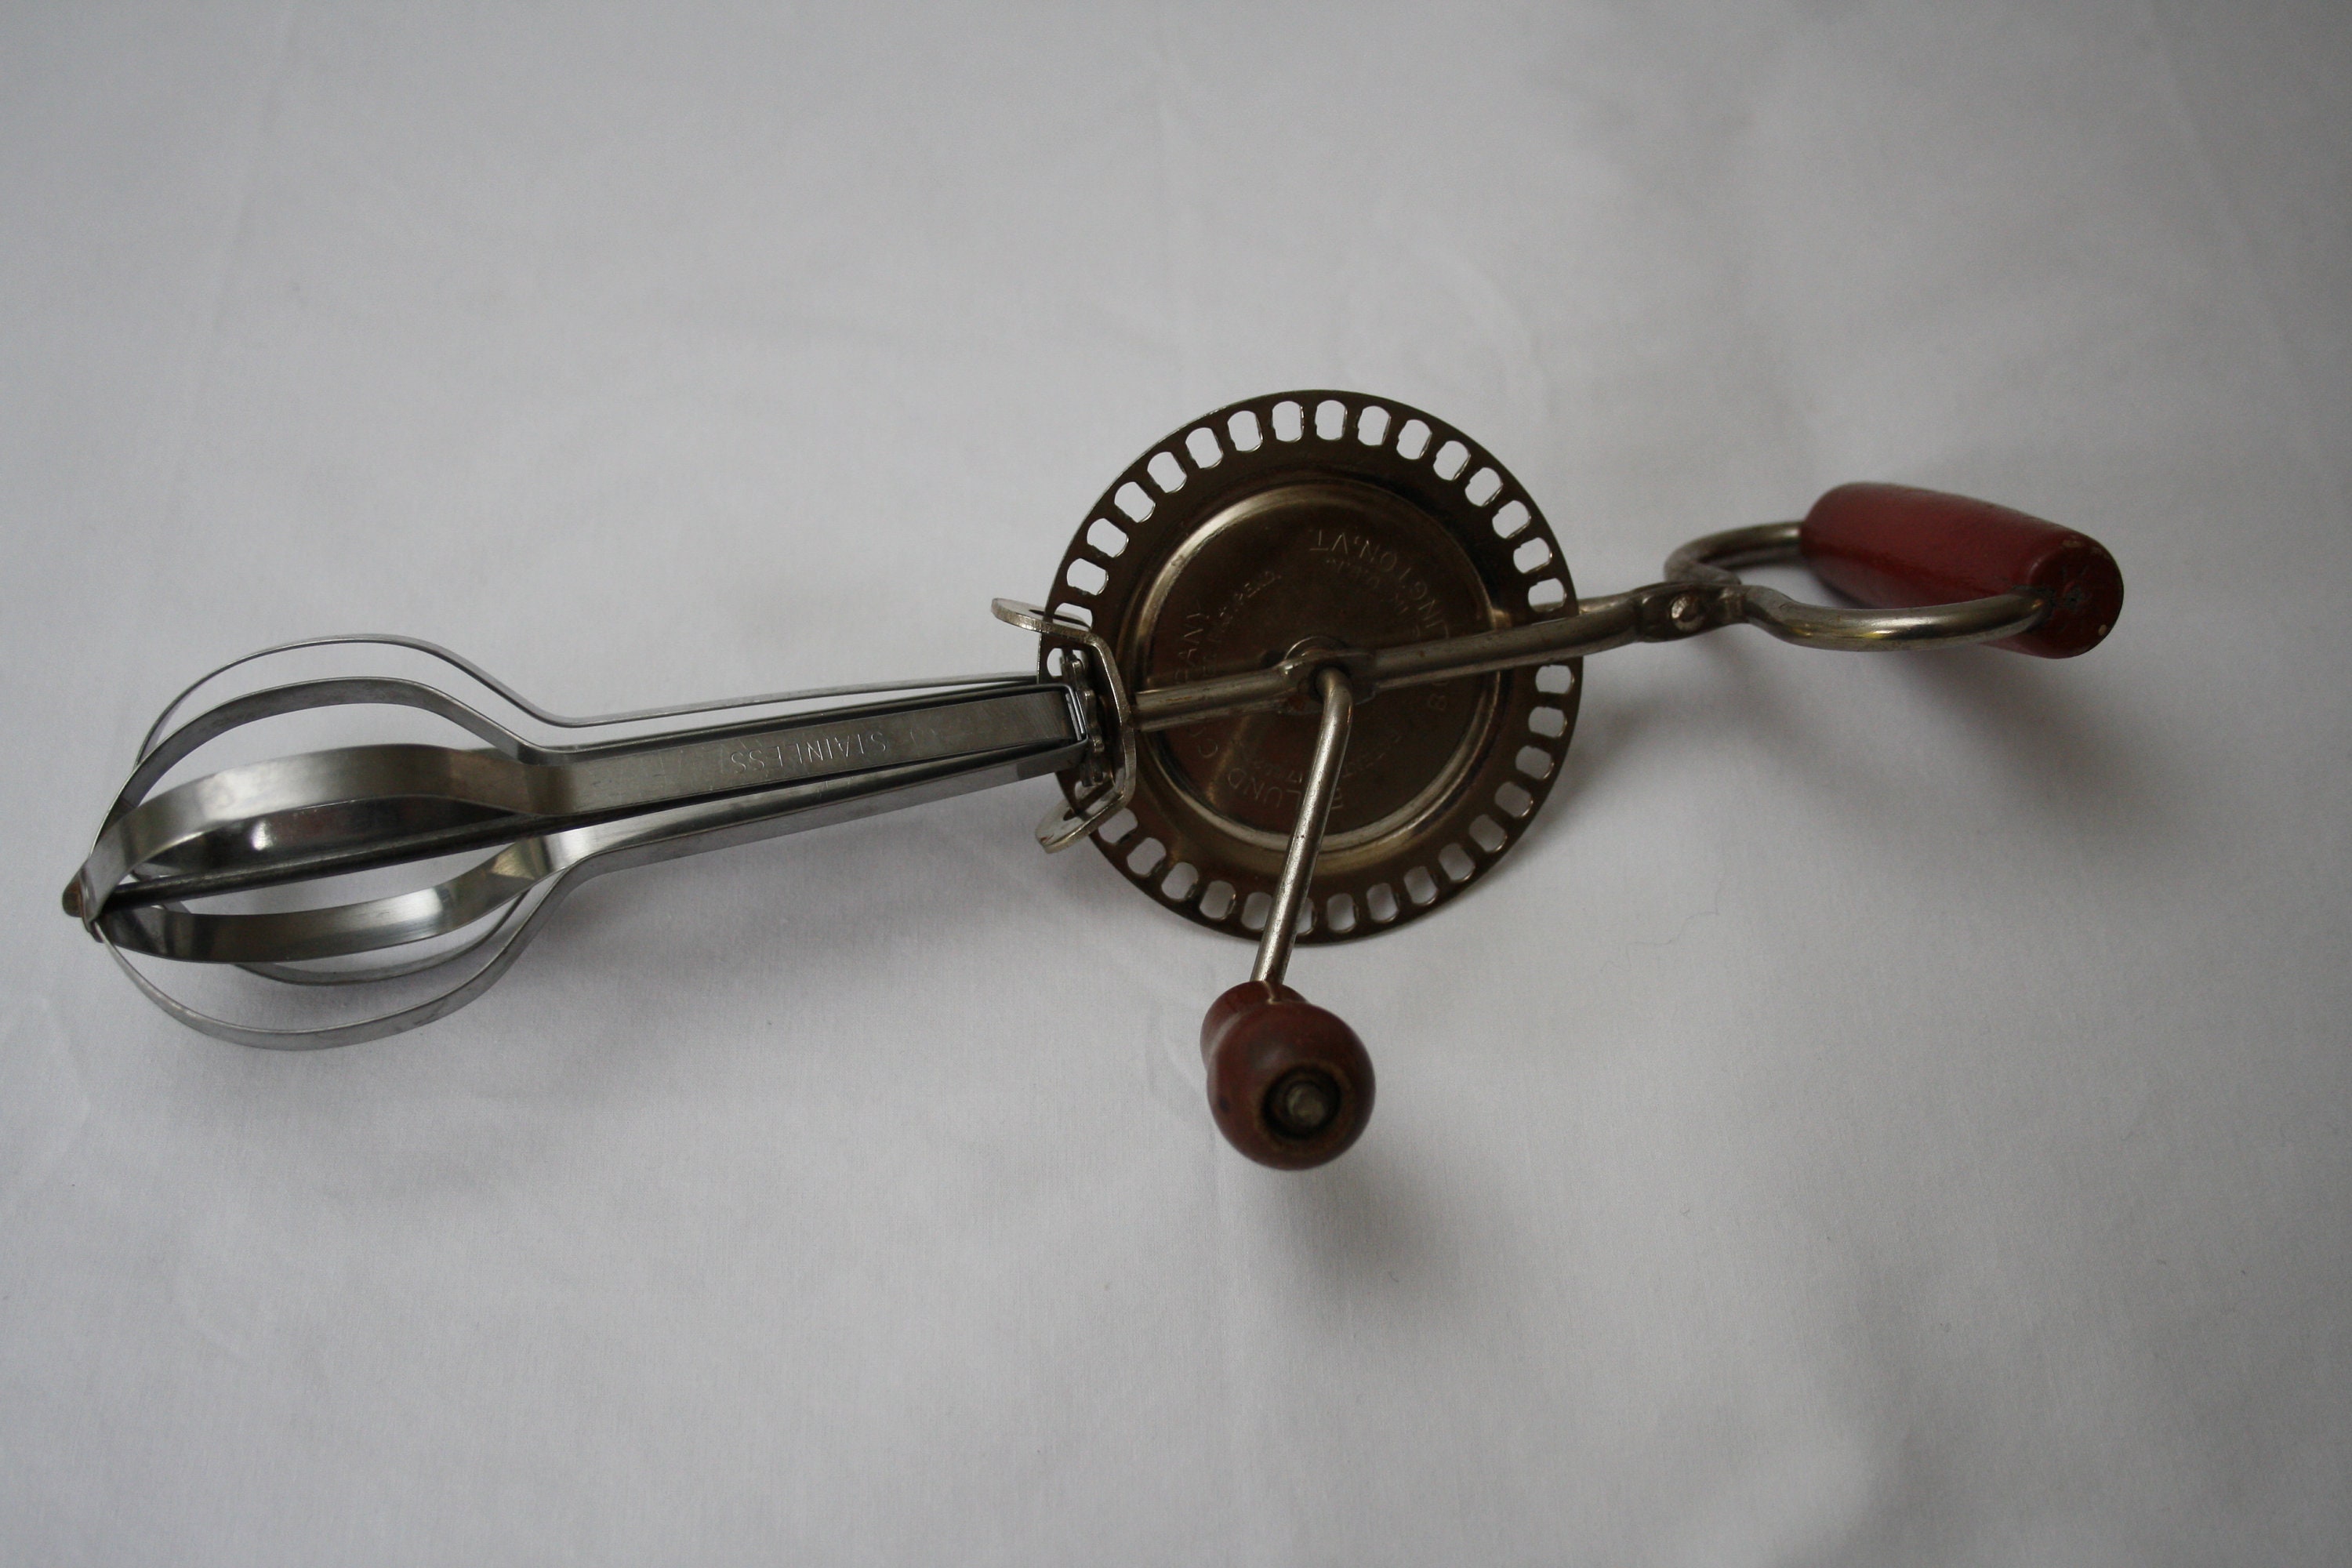 Vintage Hand Mixer Egg Beaters W/ Red Wood Handles High Speed Center Drive  Beater Manual Cooking Utensil Baking Cottage Farmhouse 